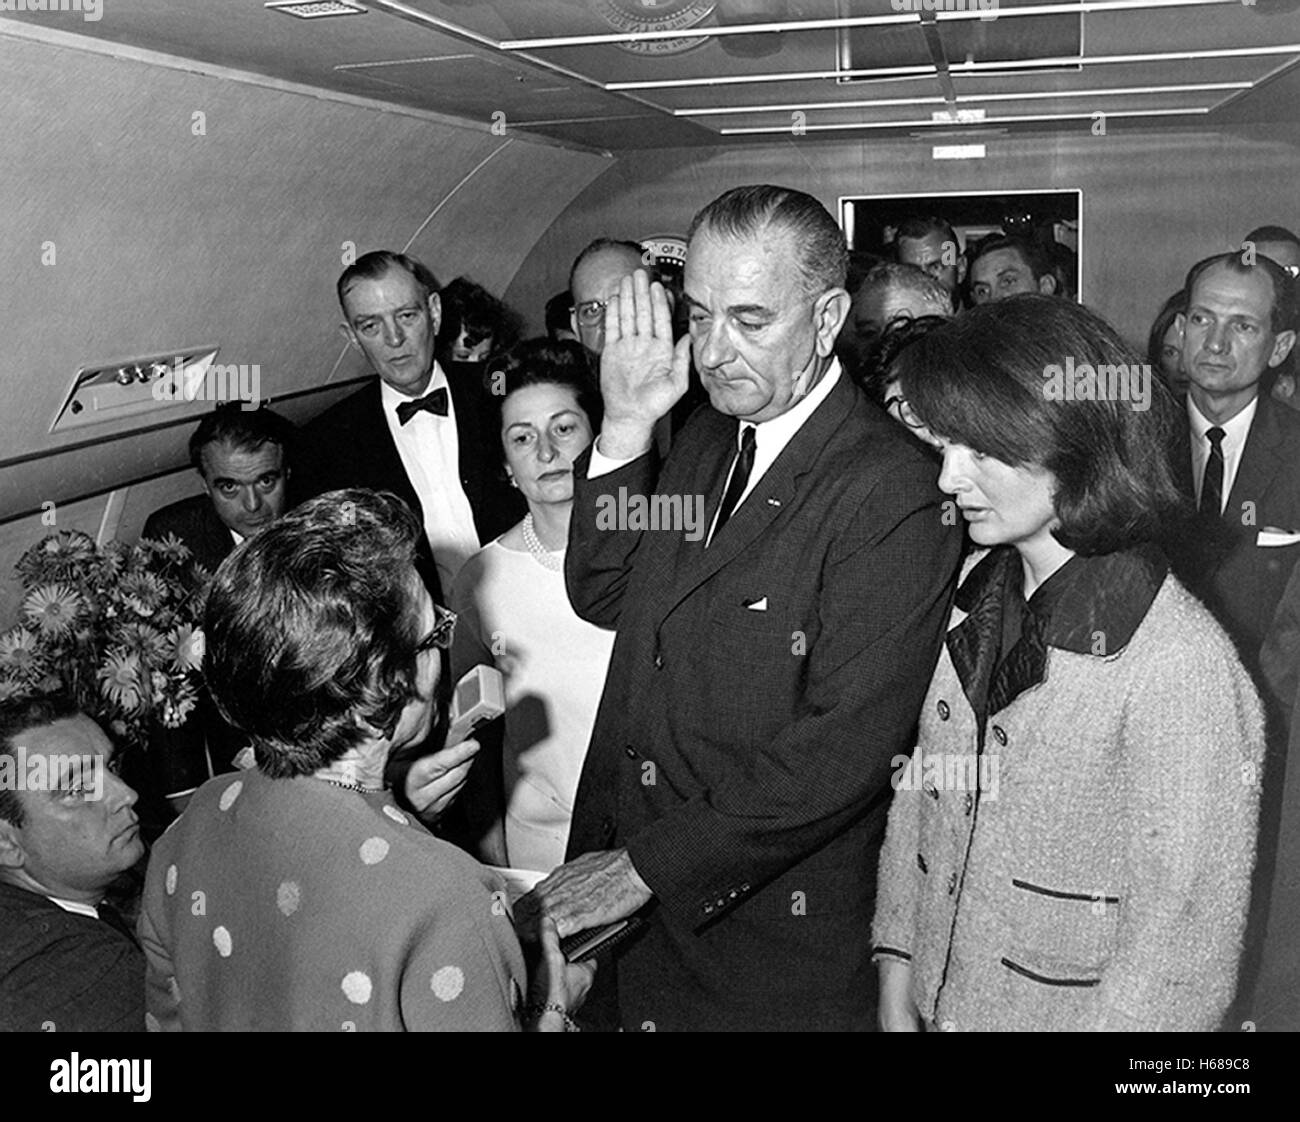 Judge Sarah T. Hughes administers the Presidential Oath of Office to Lyndon Baines Johnson aboard Air Force One on November 22, 1963, at Love Field, Dallas Texas. Mrs. Johnson, Mrs. Kennedy, Jack Valenti, Cong. Albert Thomas, Cong. Jack Brooks, Associate Press Secretary Malcolm Kilduff (holding microphone) and others witness. Photograph by Cecil Stoughton/The White House Stock Photo